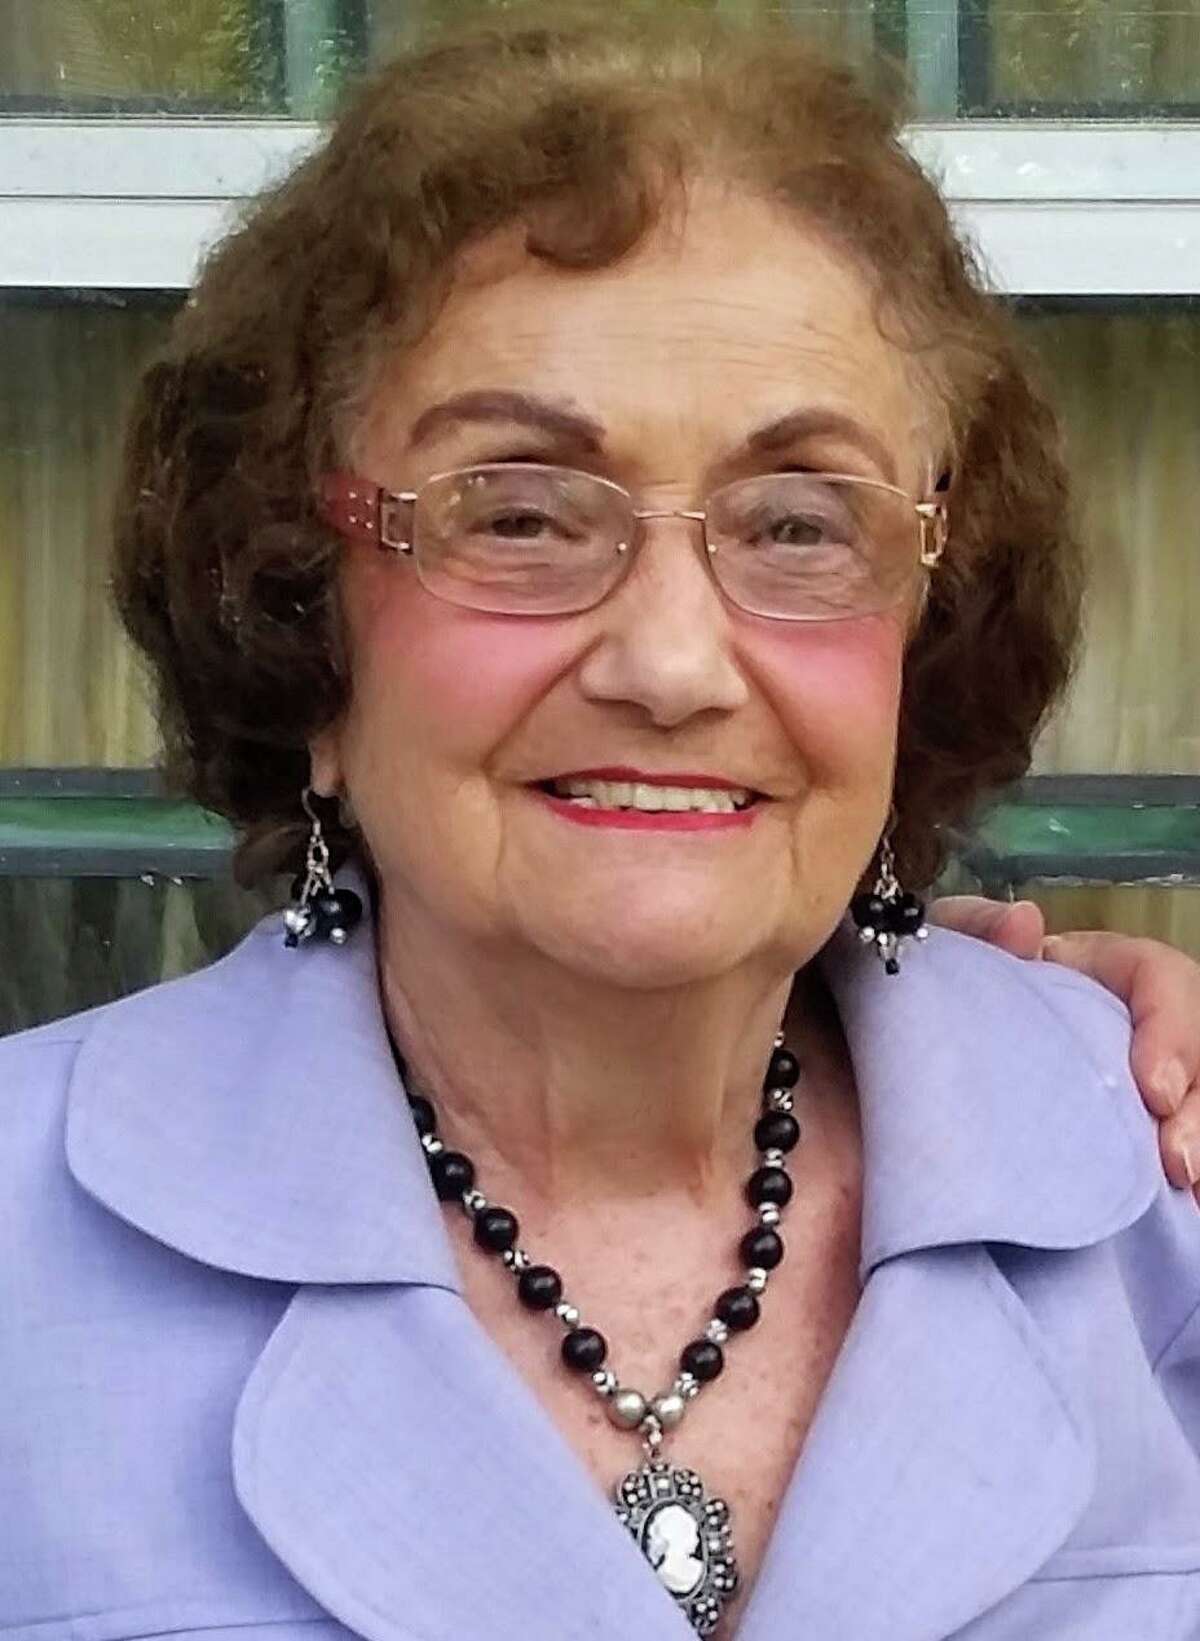 Rose Mary Infantino, 88, died on April 13, 2020 at Danbury Hospital from complications related to COVID-19. She was a resident of Maplewood of Newtown.